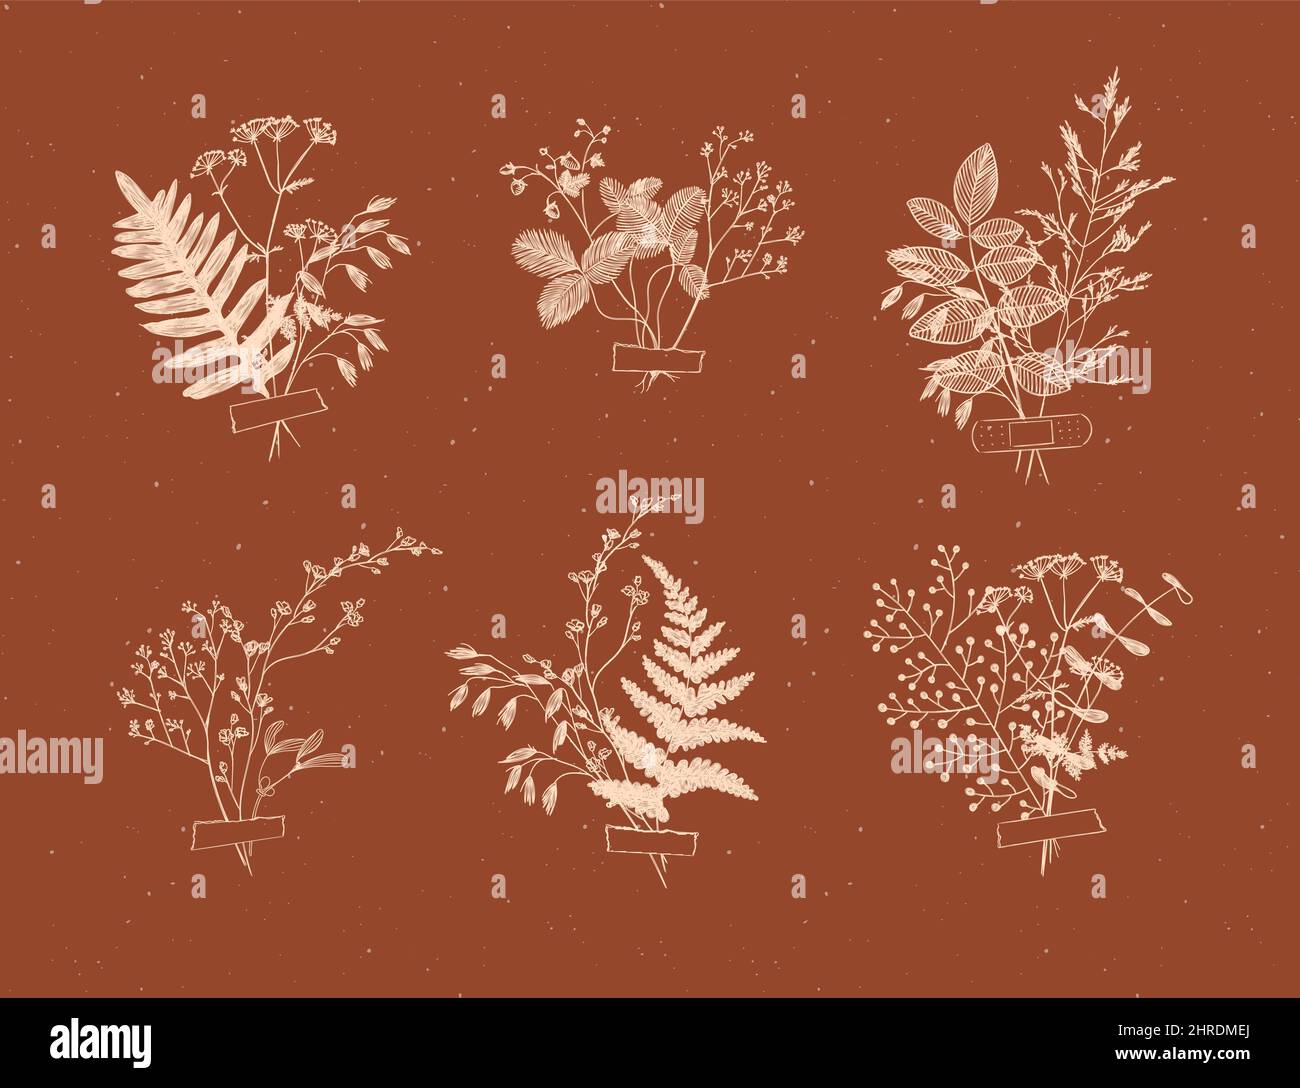 Branches and leaves are collected into a bouquet with sticker drawing in grey color on brown background Stock Vector